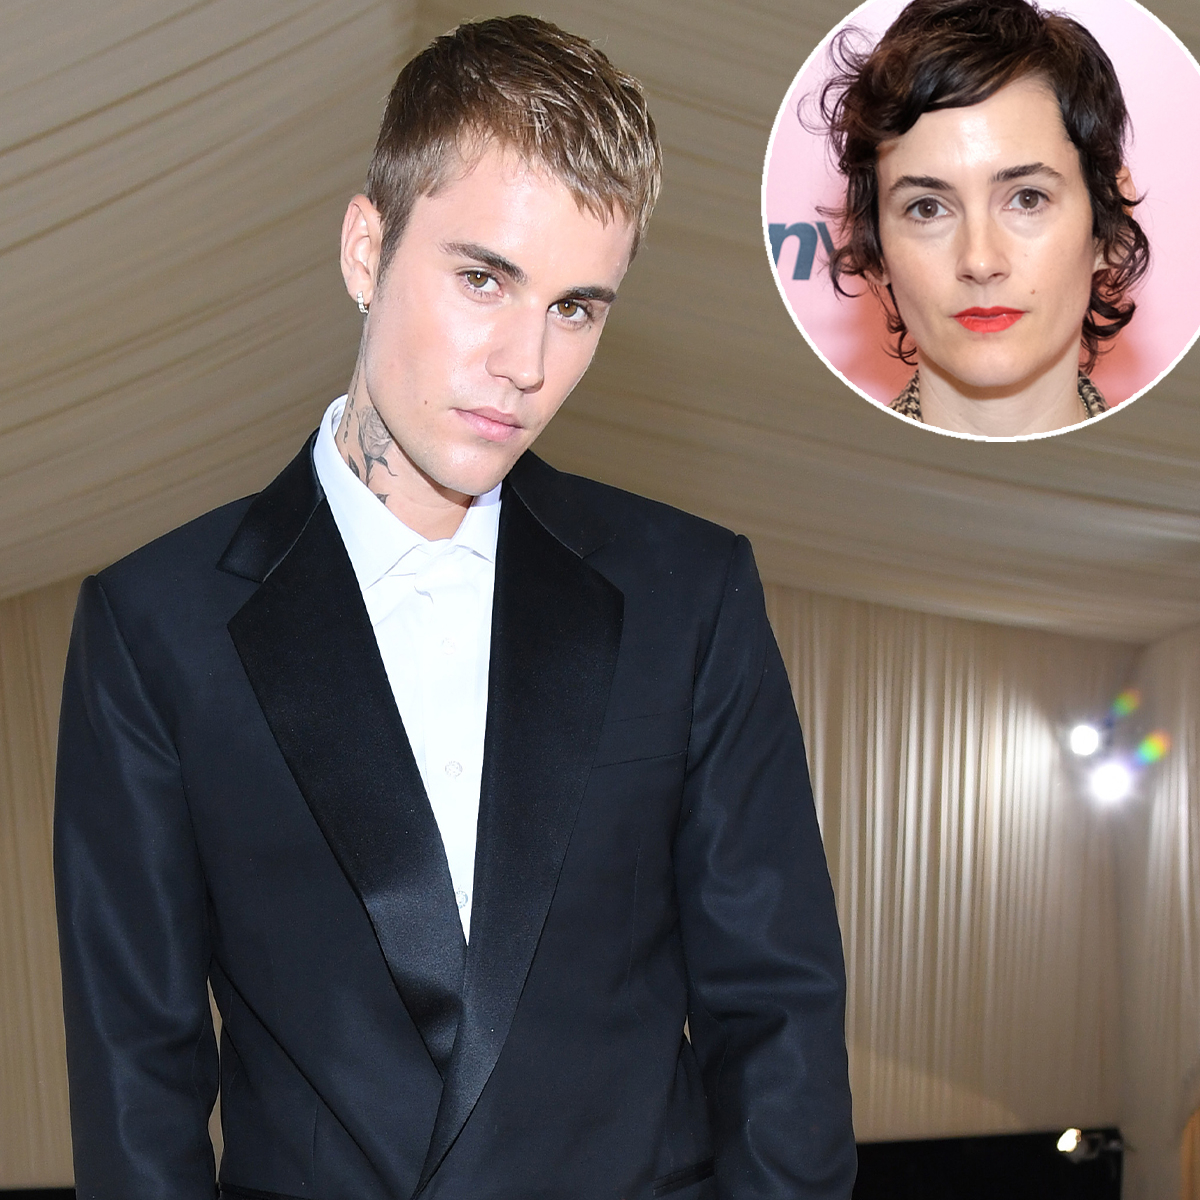 Stylist Karla Welch Reveals the Lesson She Learned From Justin Bieber